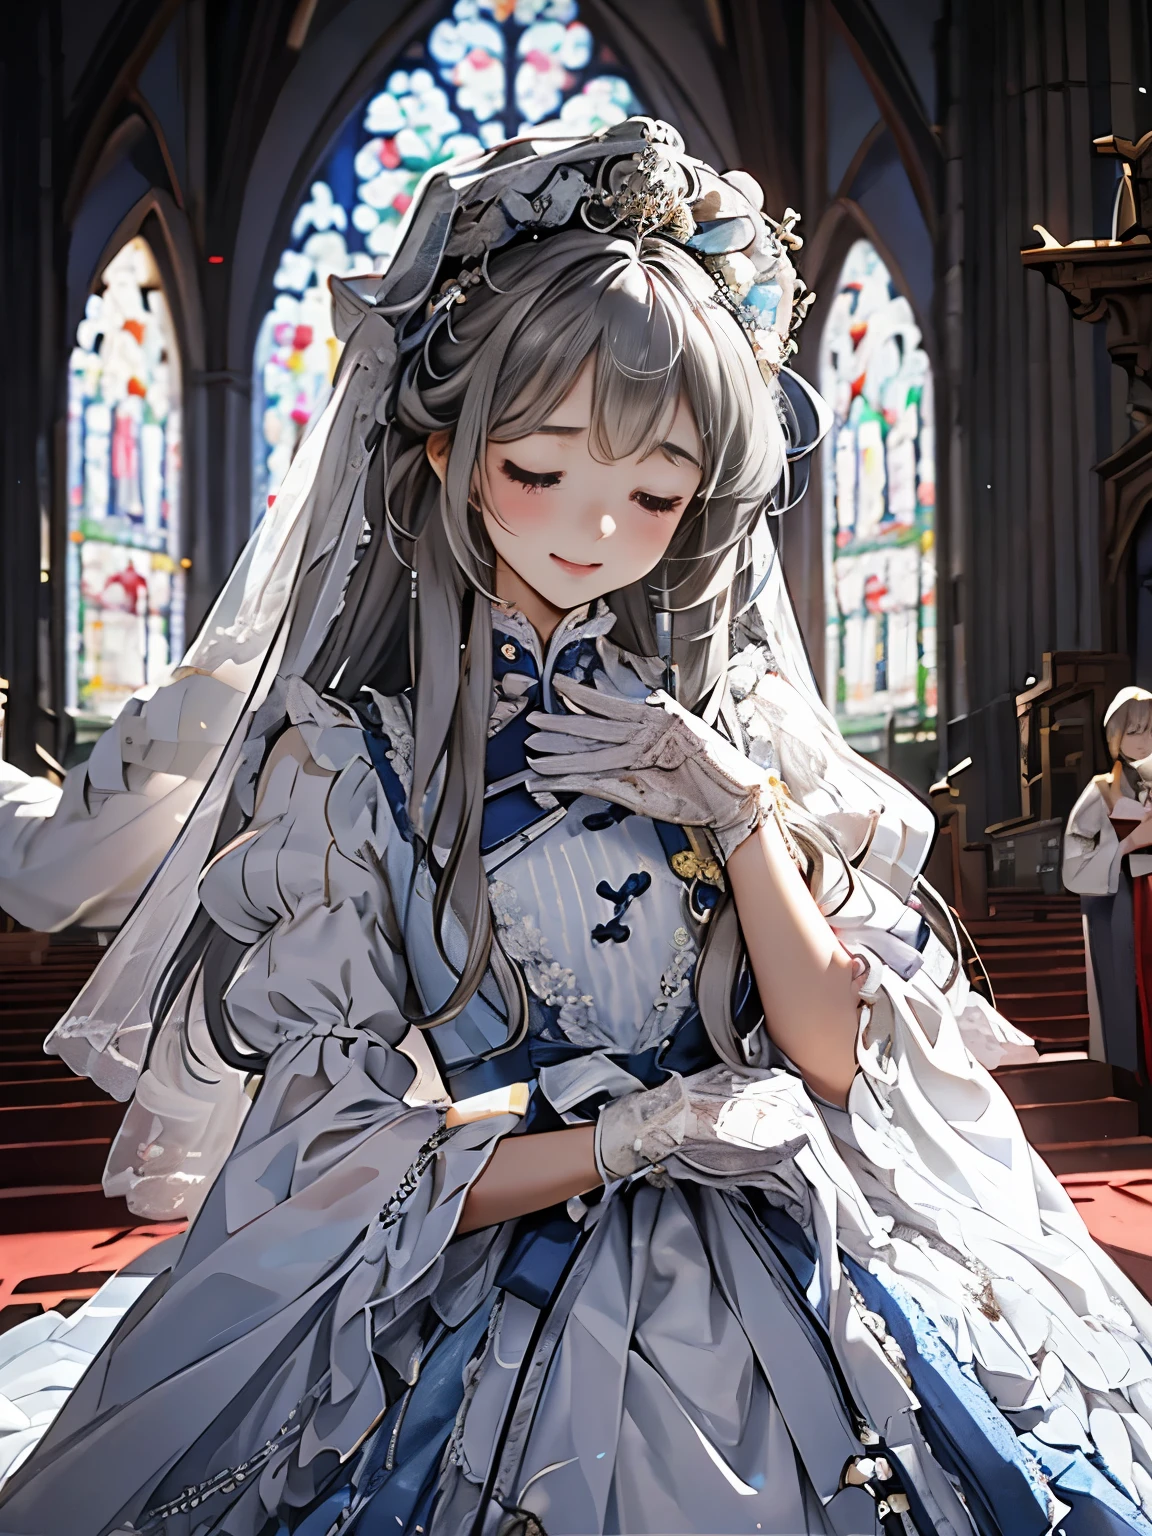 In front of the altar of a majestic church、（blurred background）、brighter light、（girl with long silver hair）、Classic White Wedding Dresses、（elegant luster）、（Lots of races）、lots of ribbons、((voluminous puff sleeves))、long cuffs with many buttons、golden embroidery、long train、white embroidered gloves、five fingers、laughter、Redness of the cheeks、(((Close ~ eyes)))